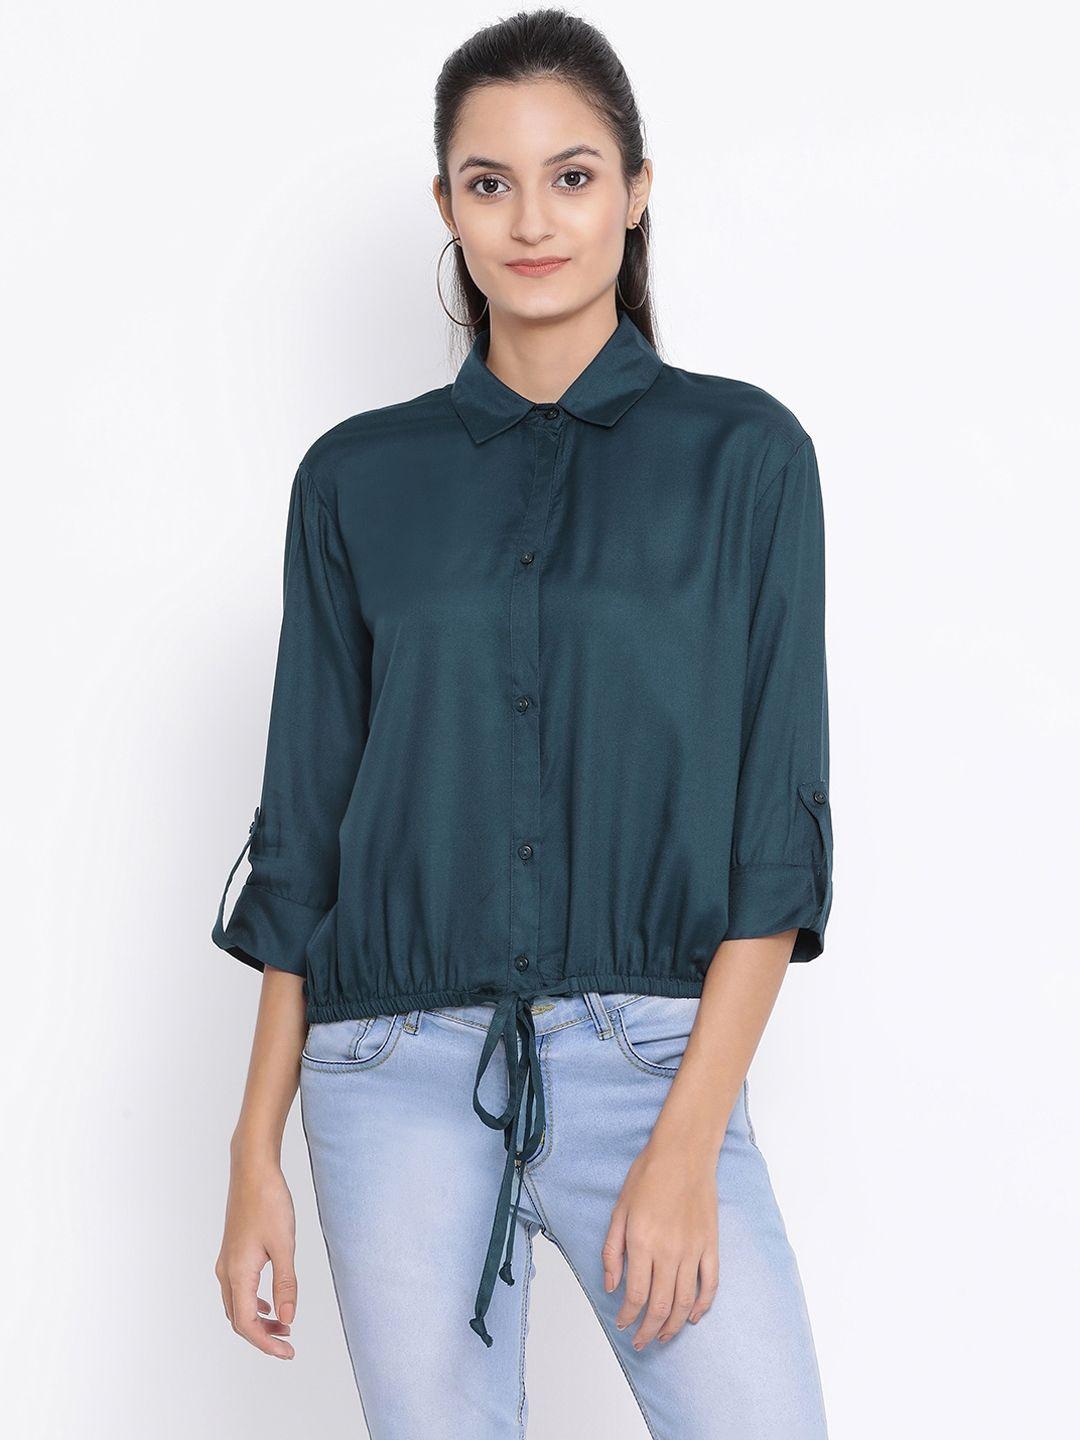 oxolloxo women teal regular fit solid casual shirt